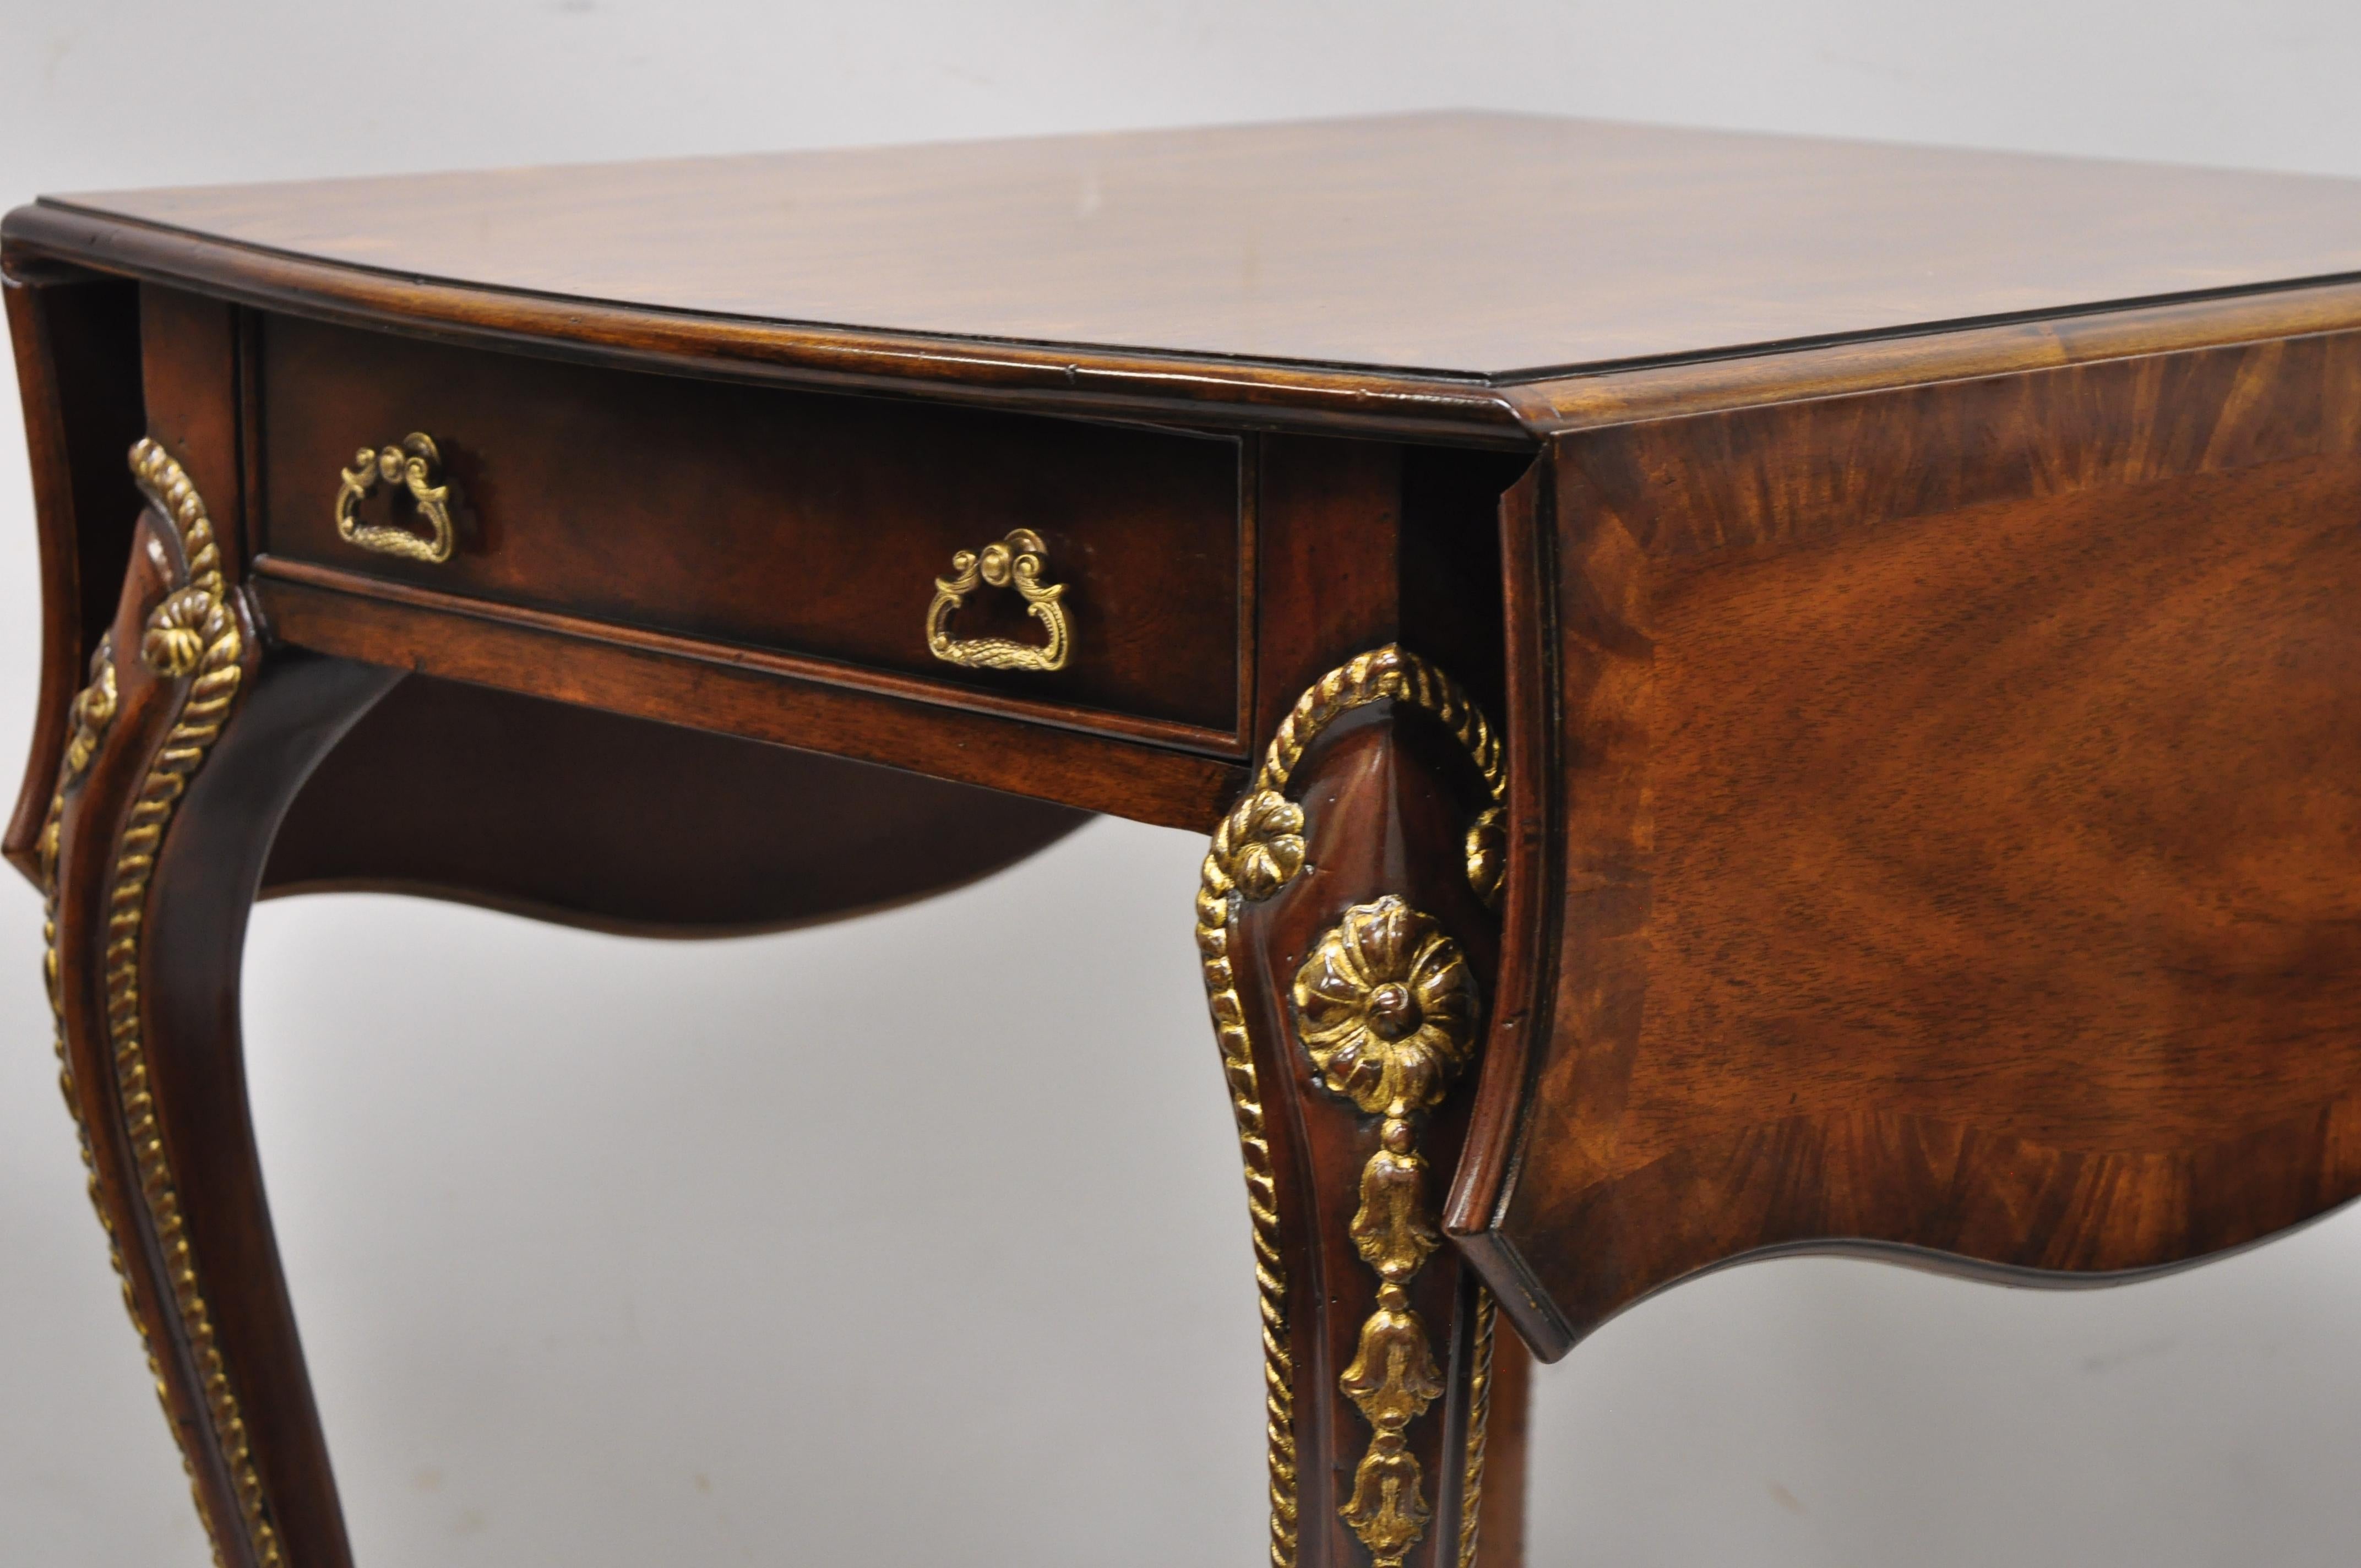 Theodore Alexander Replica English George III circa 1775 Pembroke drop-leaf table. Item features serpentine drop leaf top, rope carved cabriole legs, solid wood construction, beautiful wood grain, original tags and paperwork, 2 dovetailed drawers,